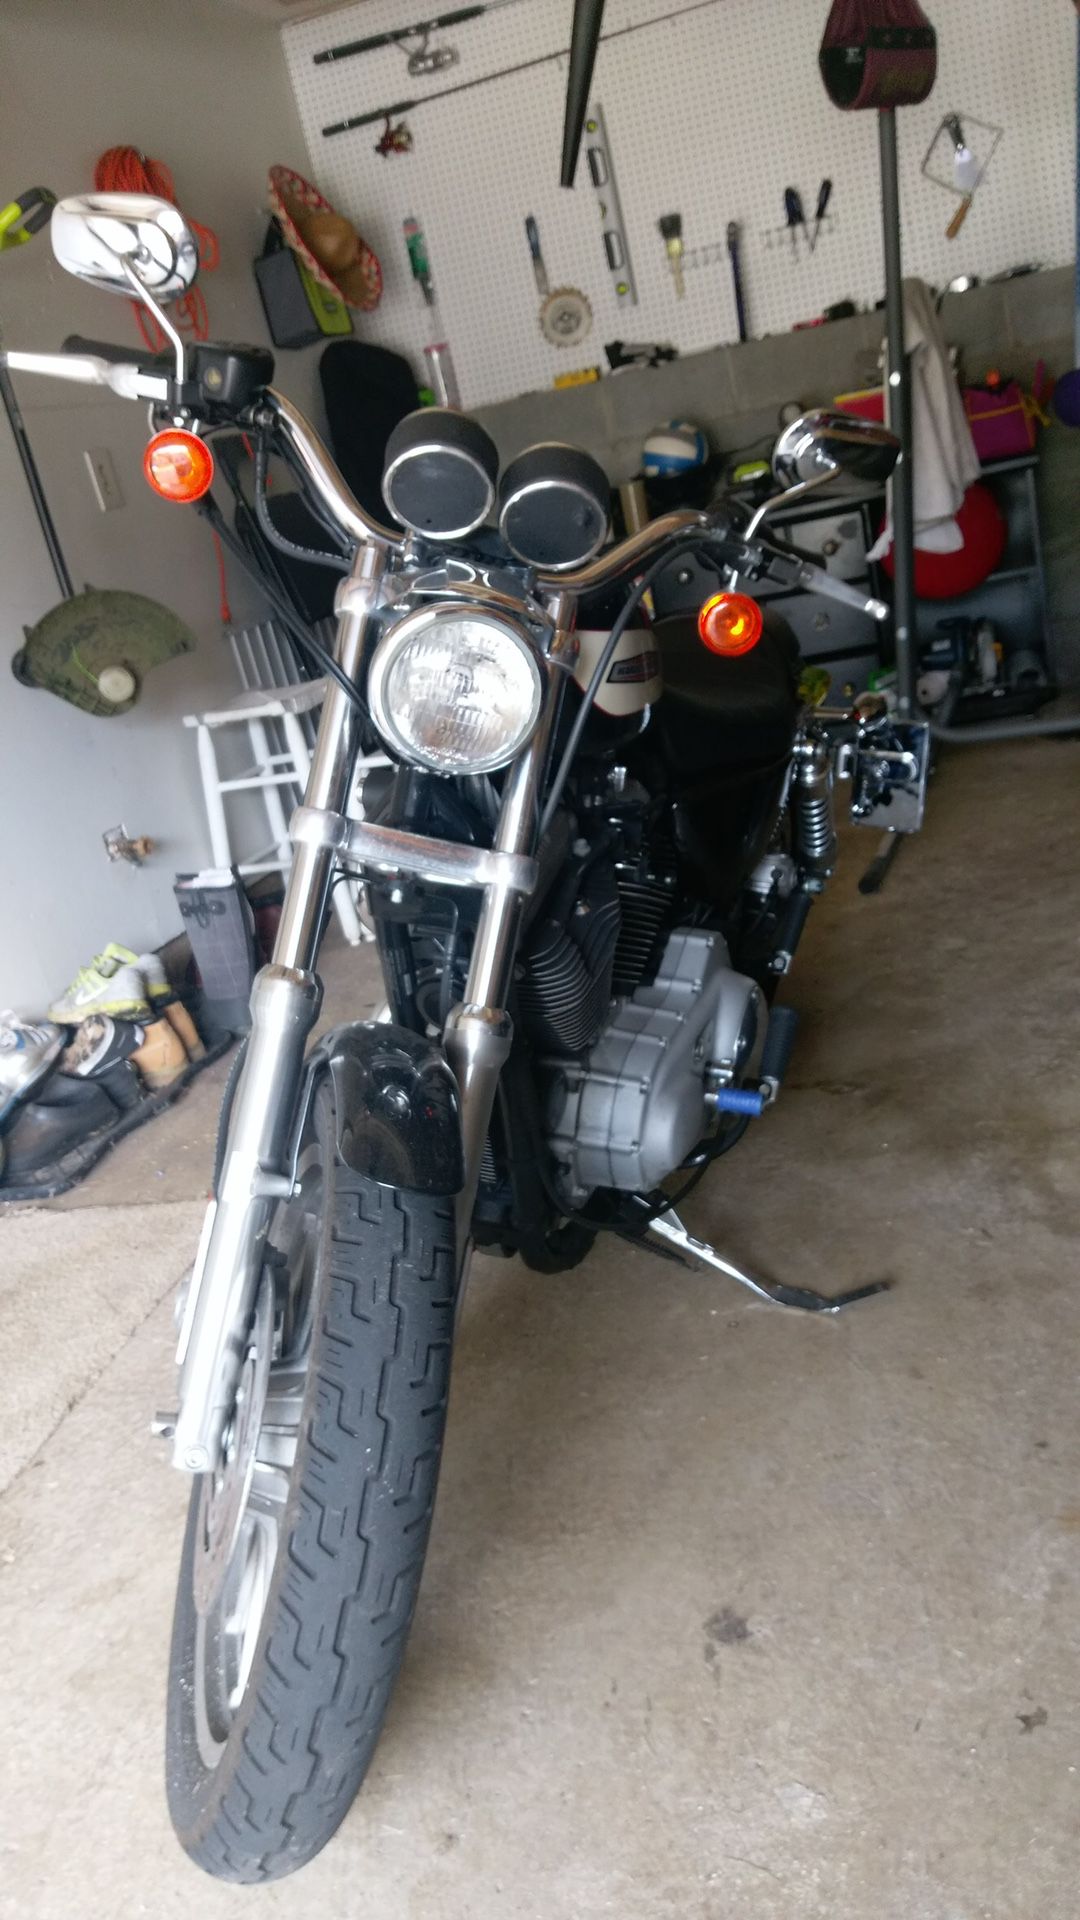 Harley Davidson 04’ less then 7k miles couple custom updates. New clutche, rear view mirrors, custom license place side mount, cafe style front end.